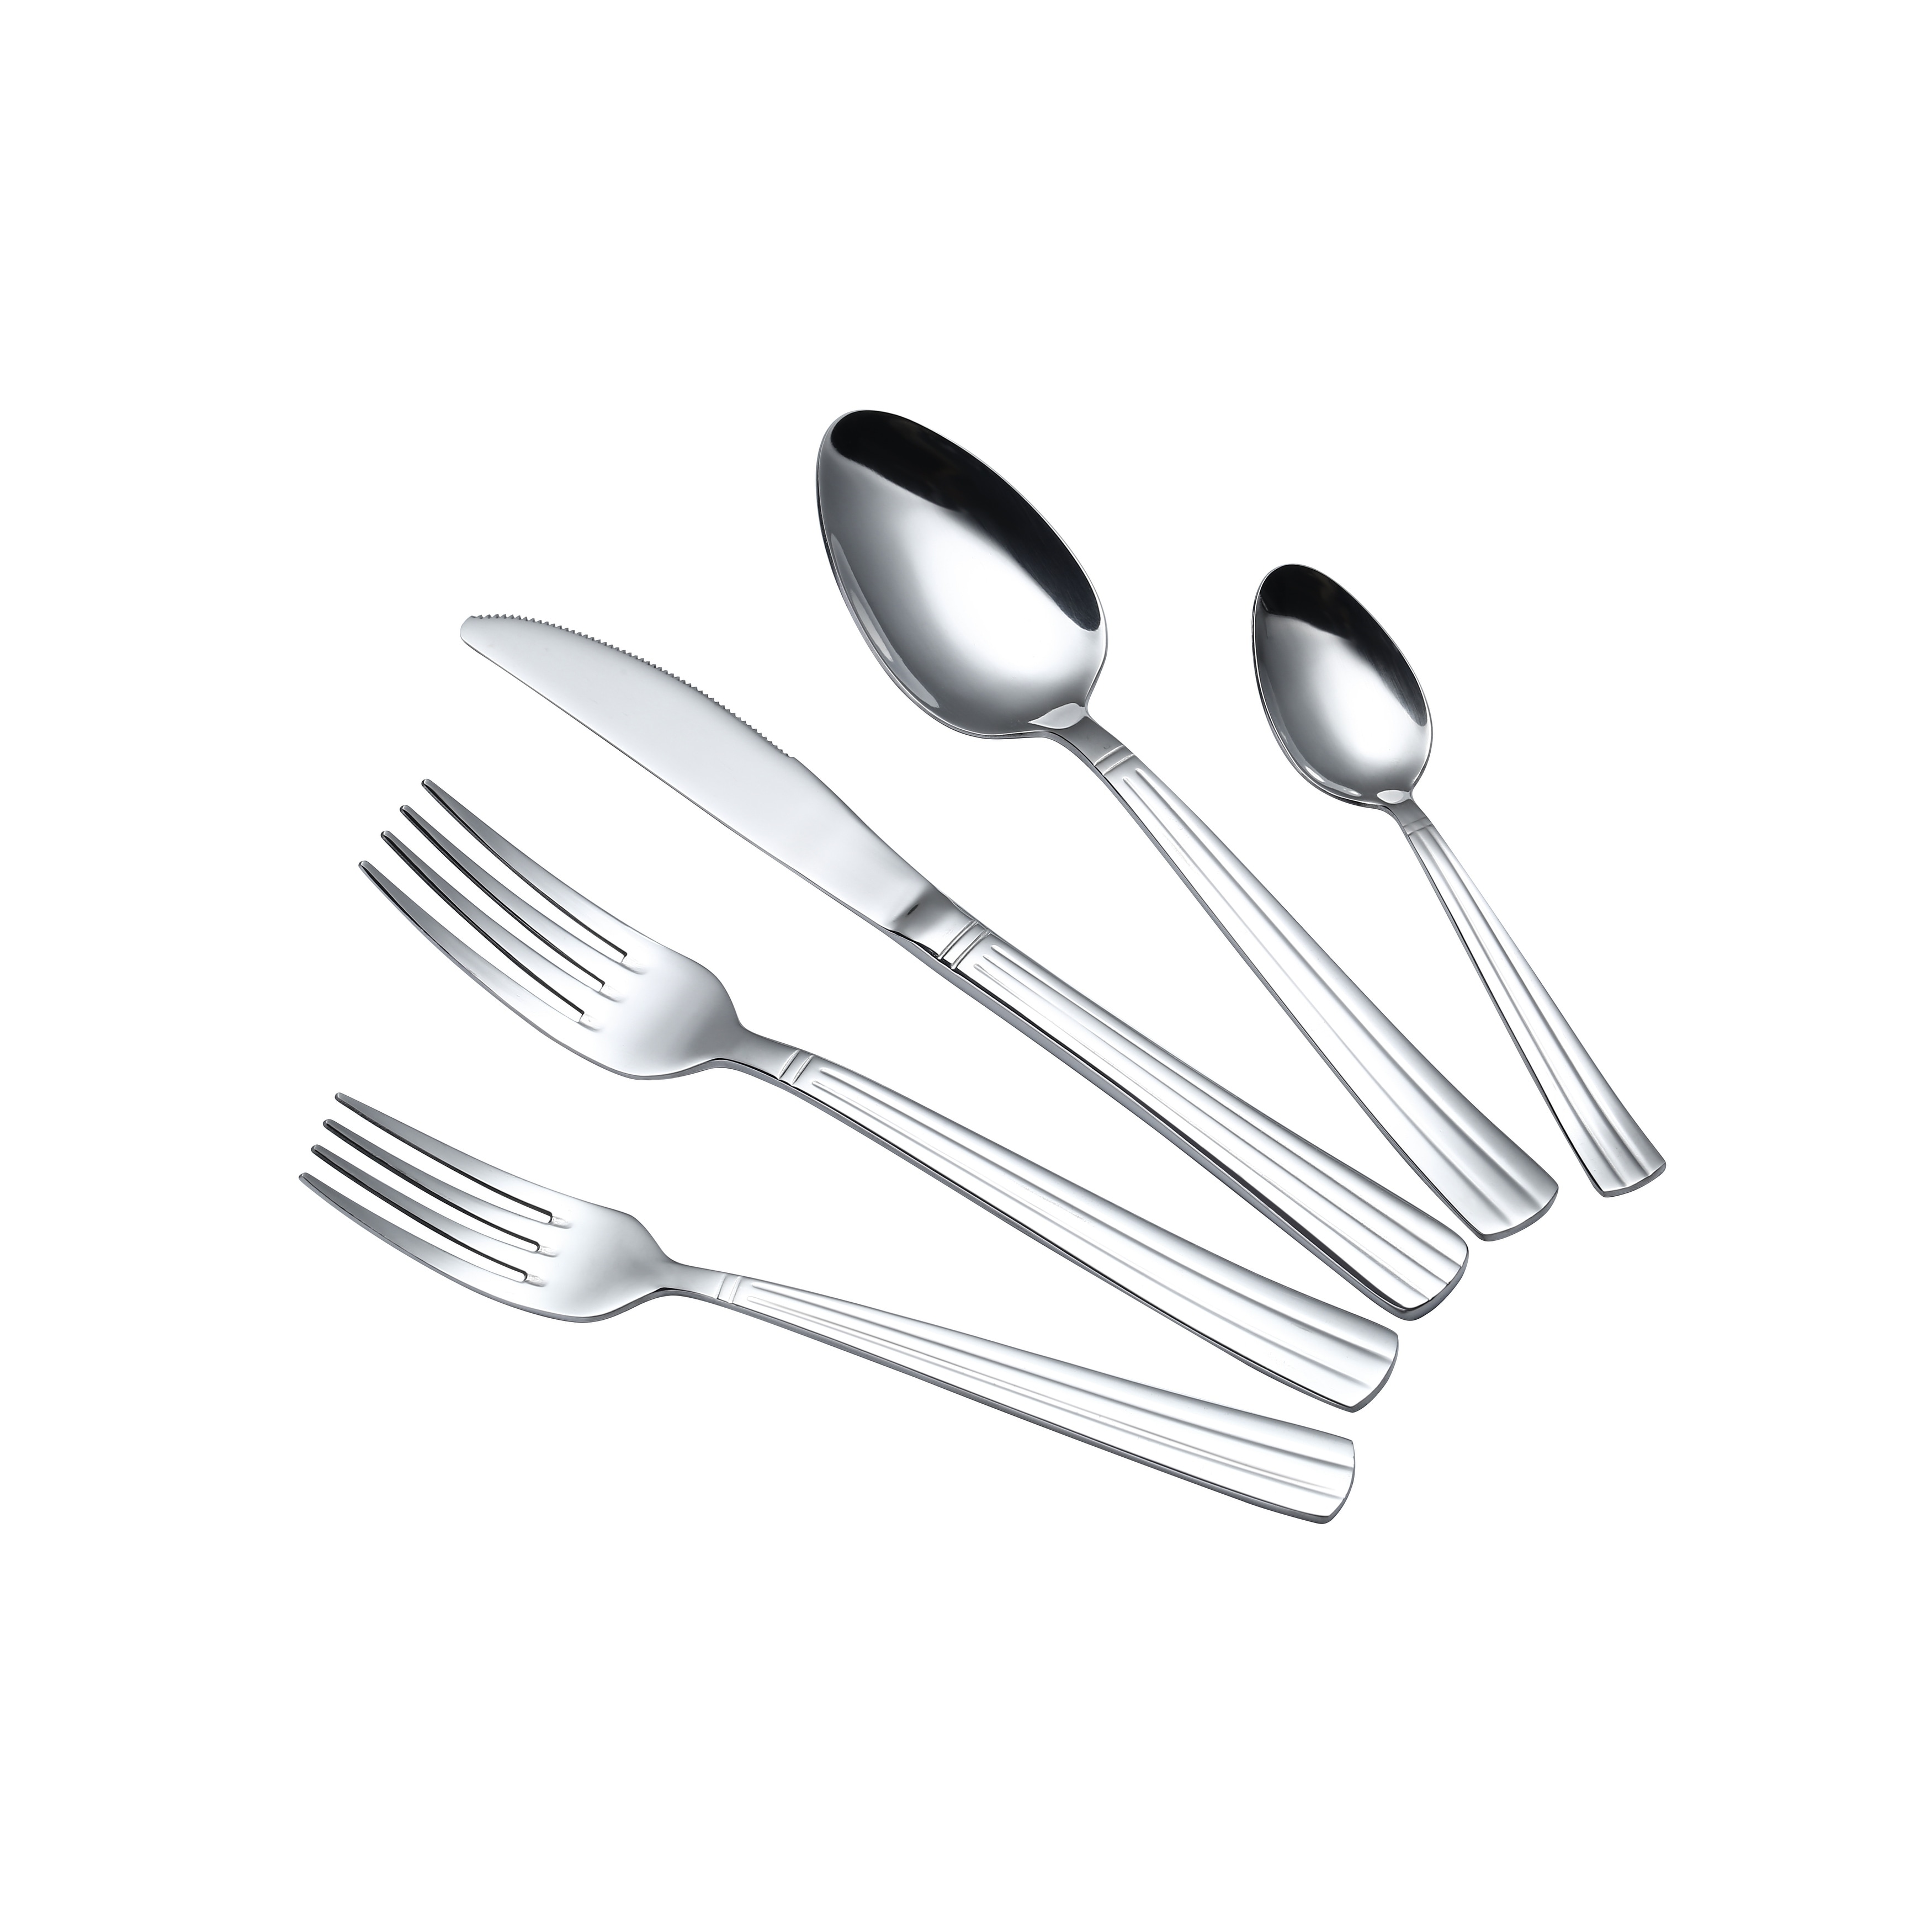 https://ak1.ostkcdn.com/images/products/28670113/20-Pcs-Hand-Polish-Stainless-Steel-Cutlery-Set-5.5-8-8.5-2d57a38e-1190-4f11-aed2-3ad5aafbf410.jpg